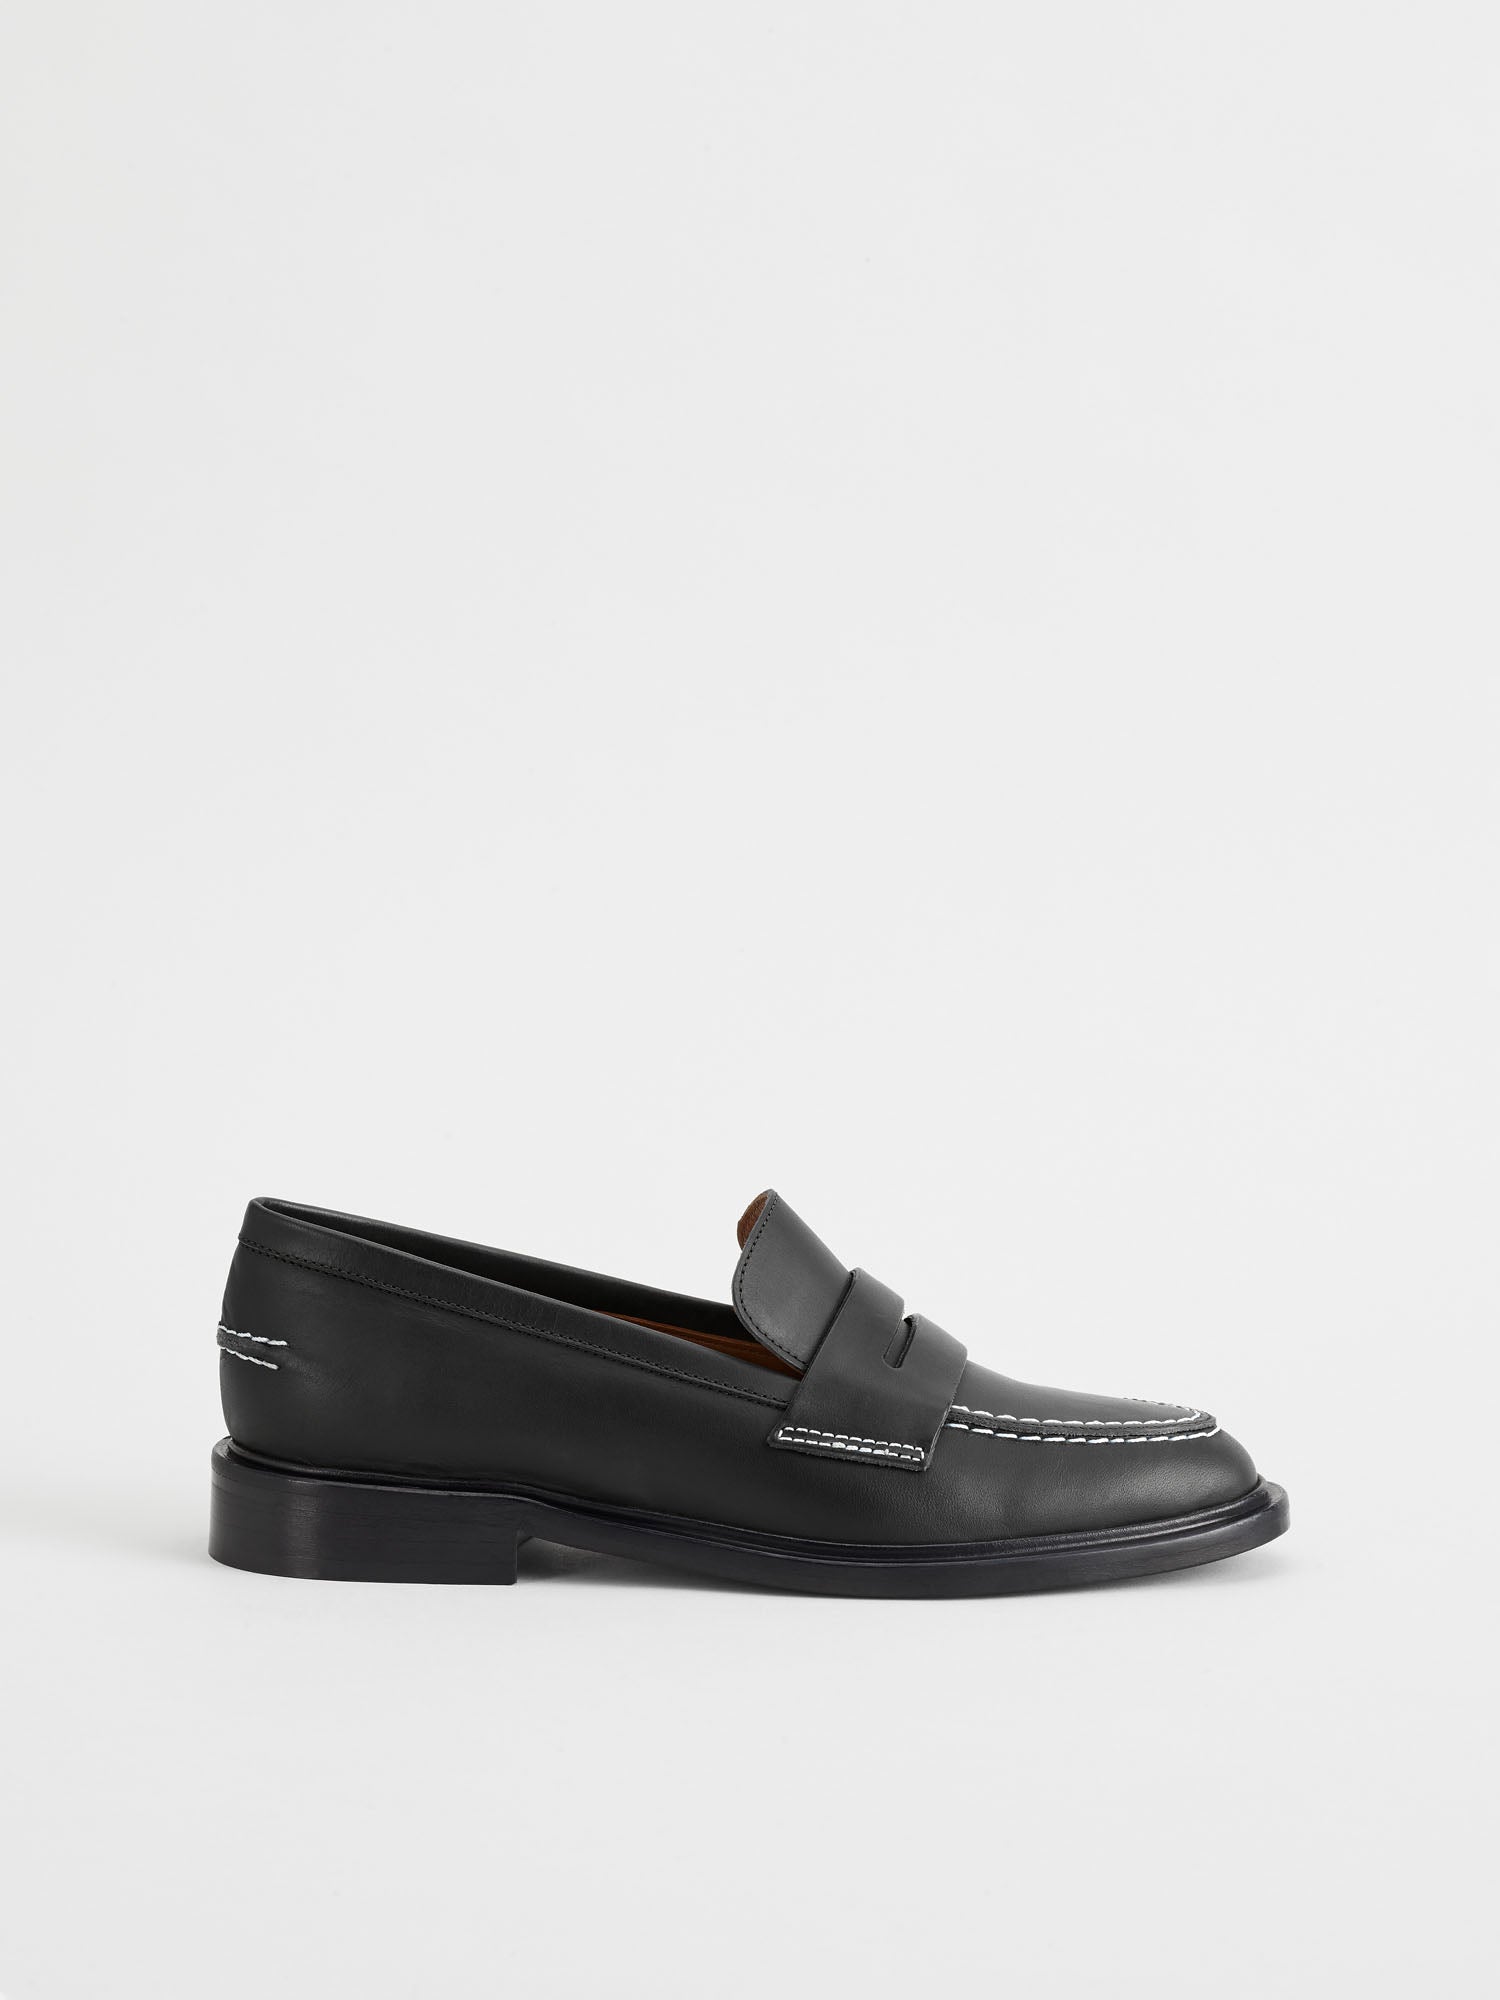 Monti Black Leather Loafers